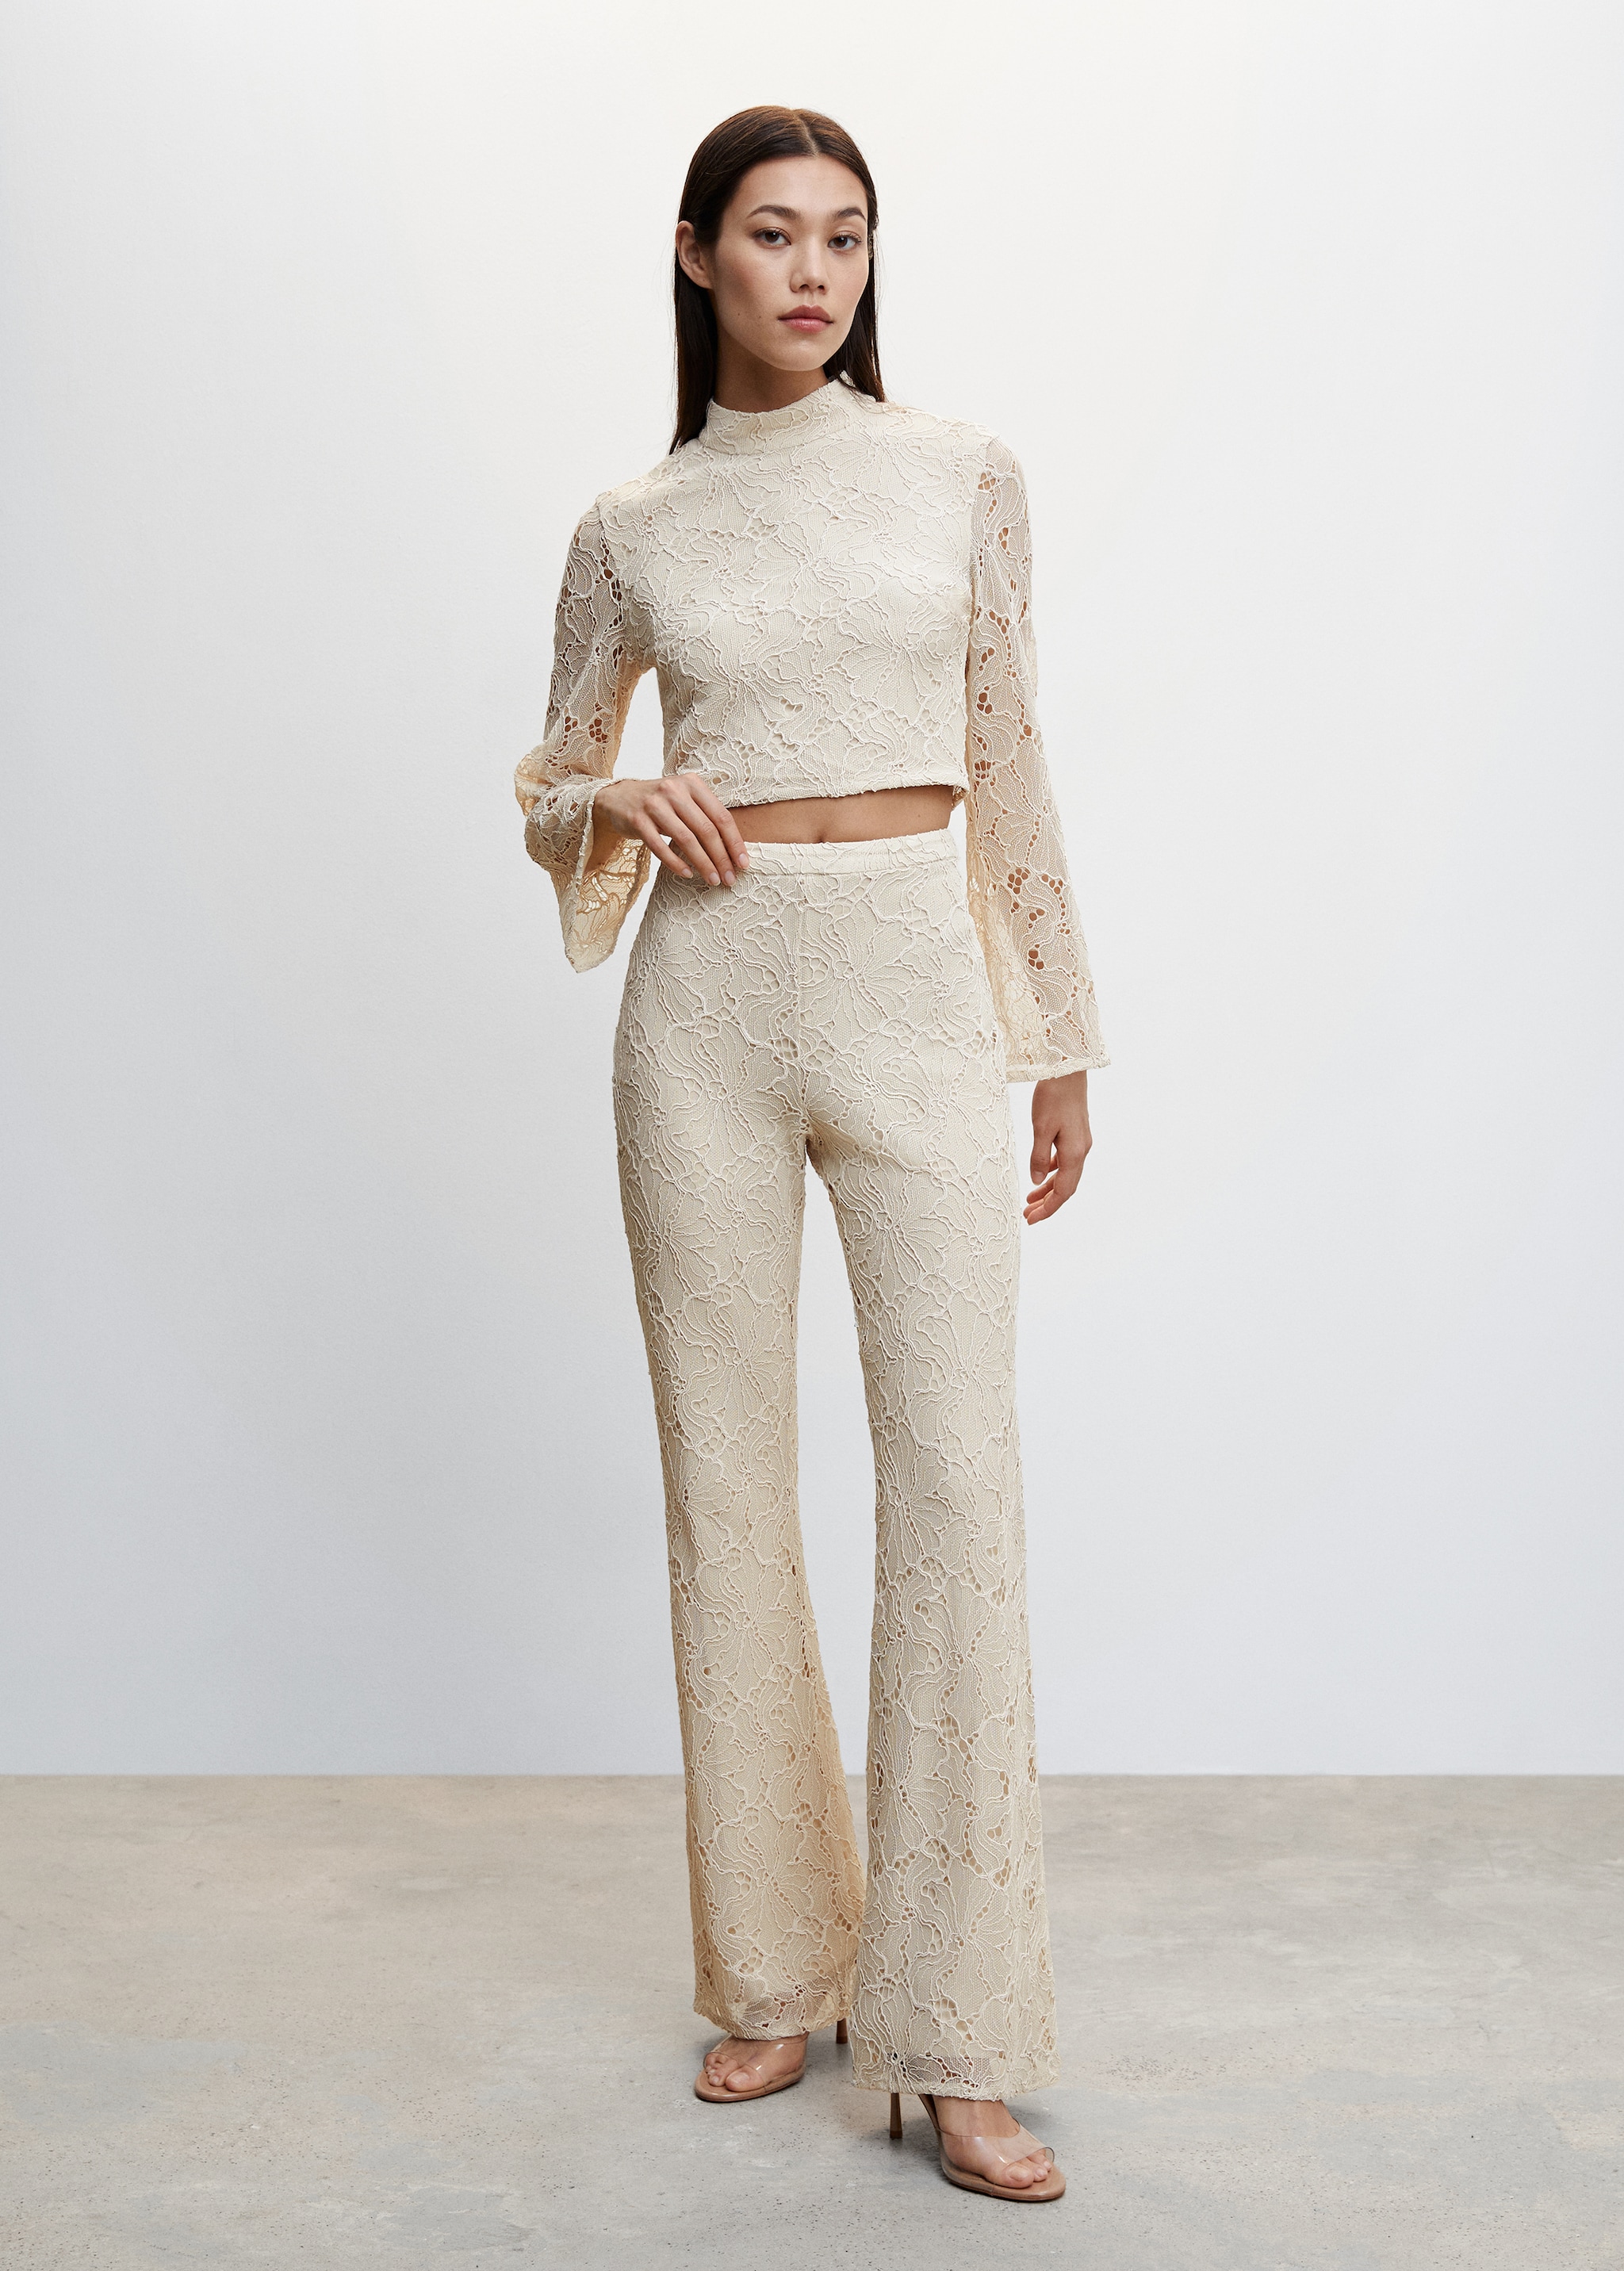 Lace flare trousers - General plane